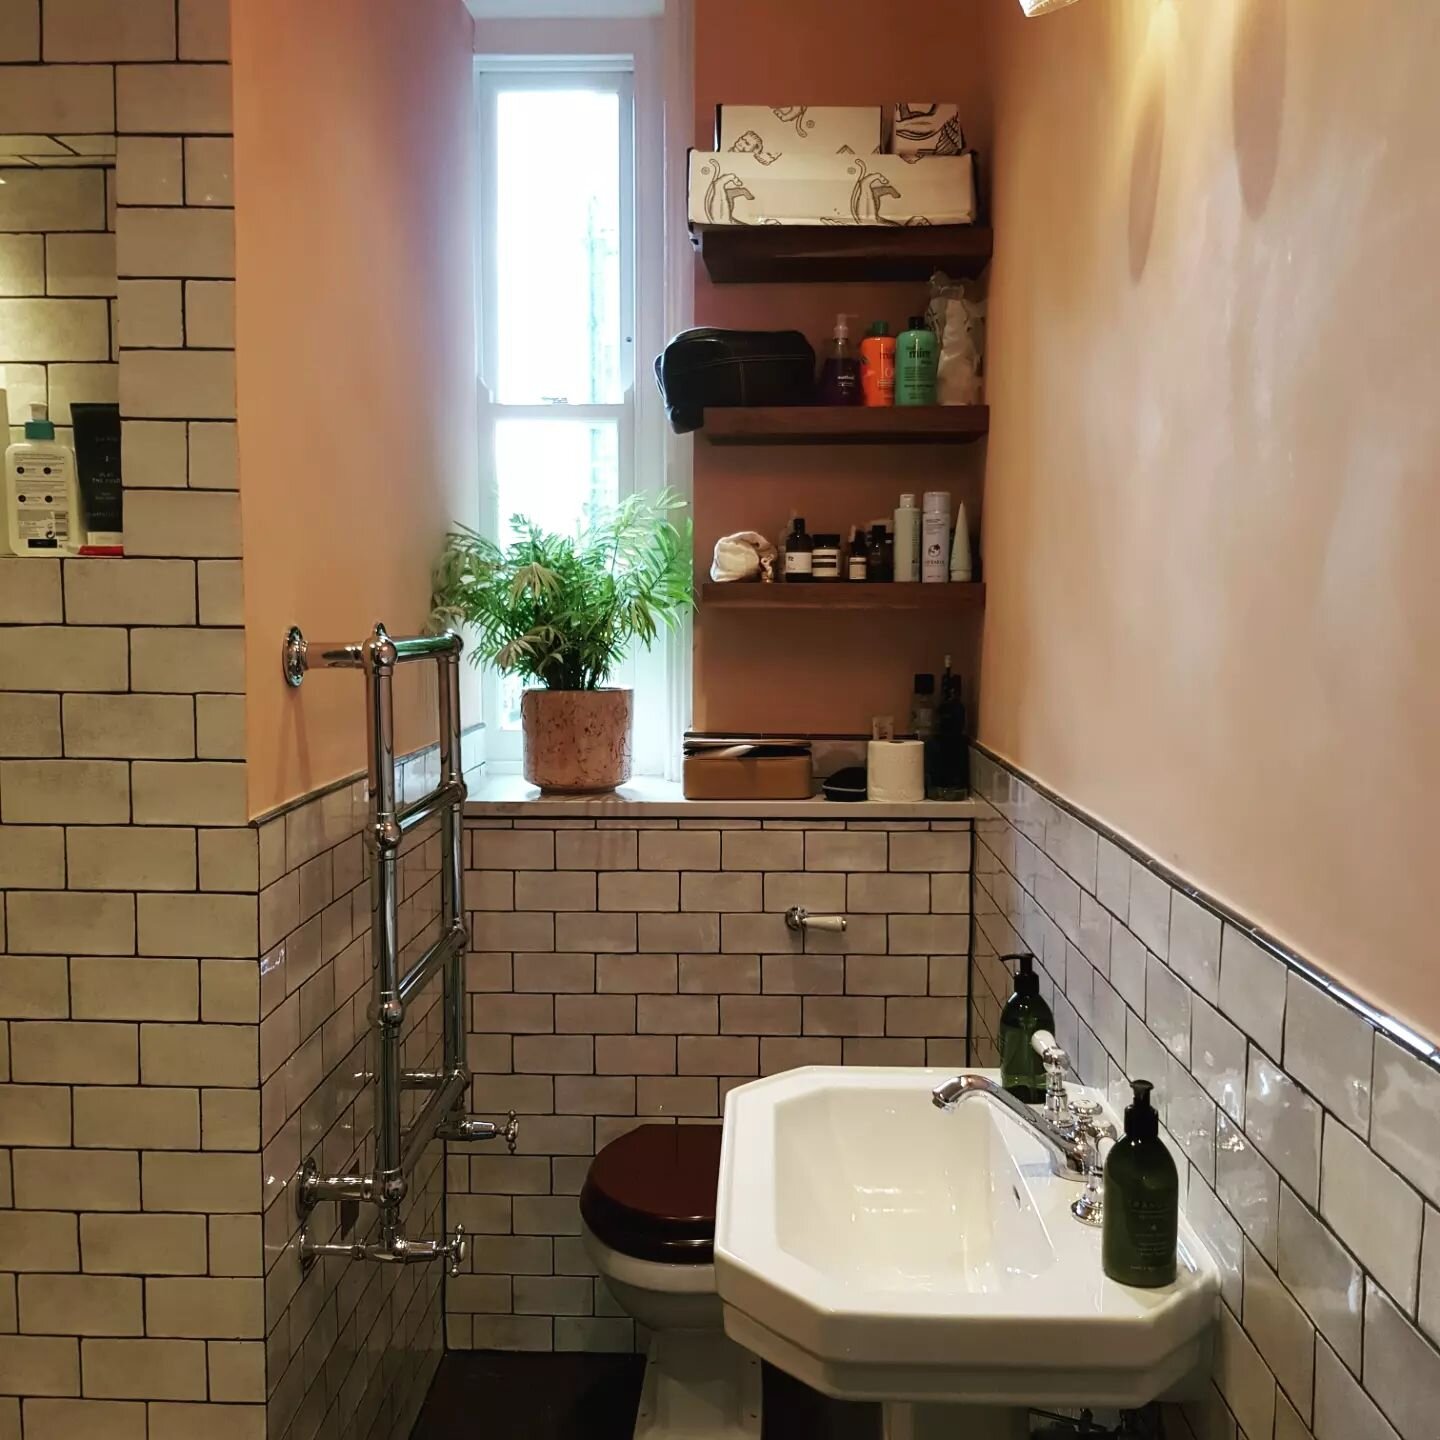 Small bathrooms are hard to photograph but fun to design, this is a tiny one from a recent London project with a complimentary palette of materials

#metrotiles #tadelak #plasterwalls #interiordesign #traditionalmaterials
#bathroomdesign #londoninter